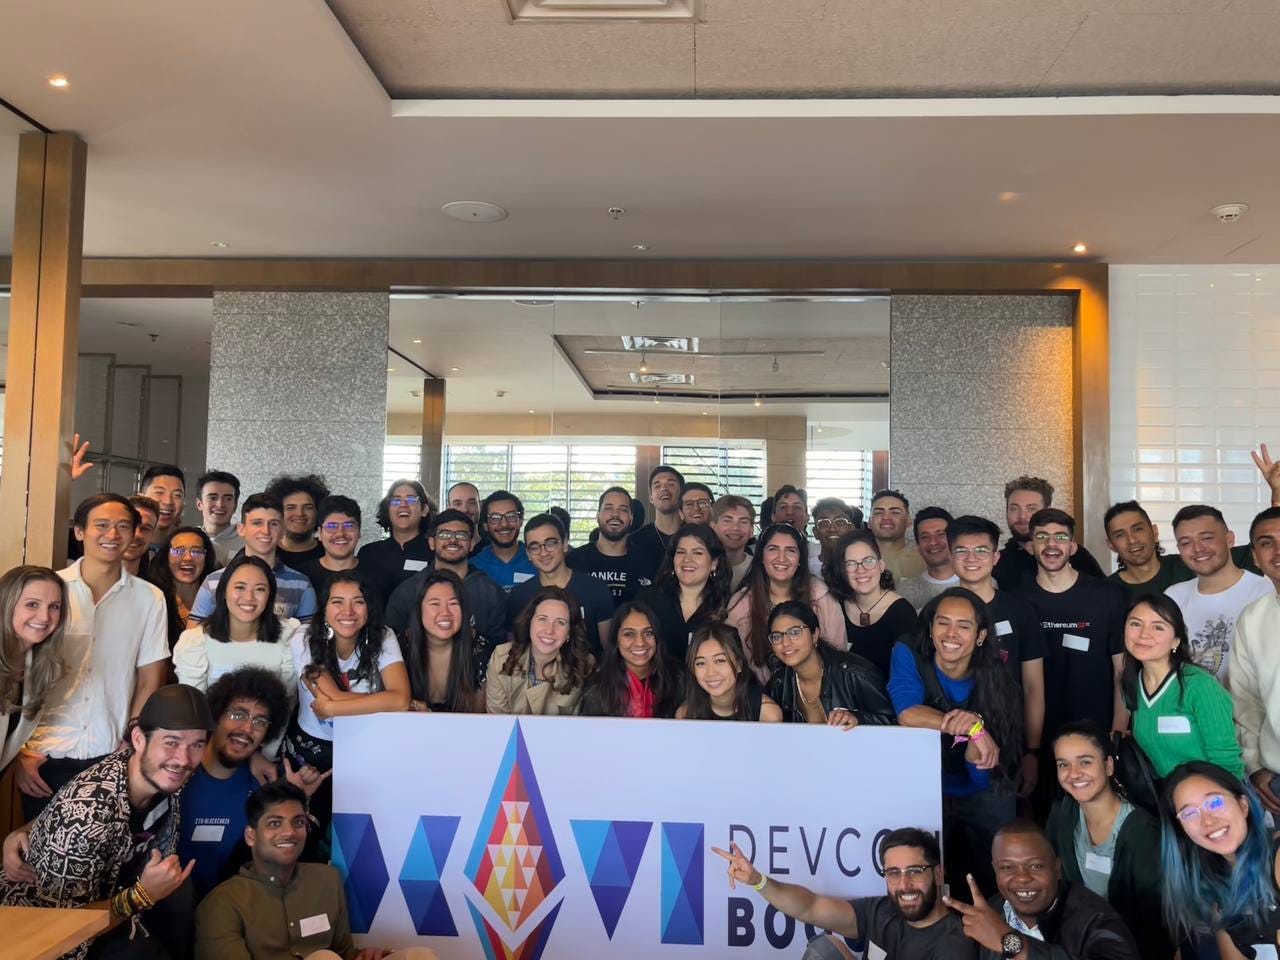 photo of all the devcon scholars together in front of a devcon sign. this is from our devcon breakfast